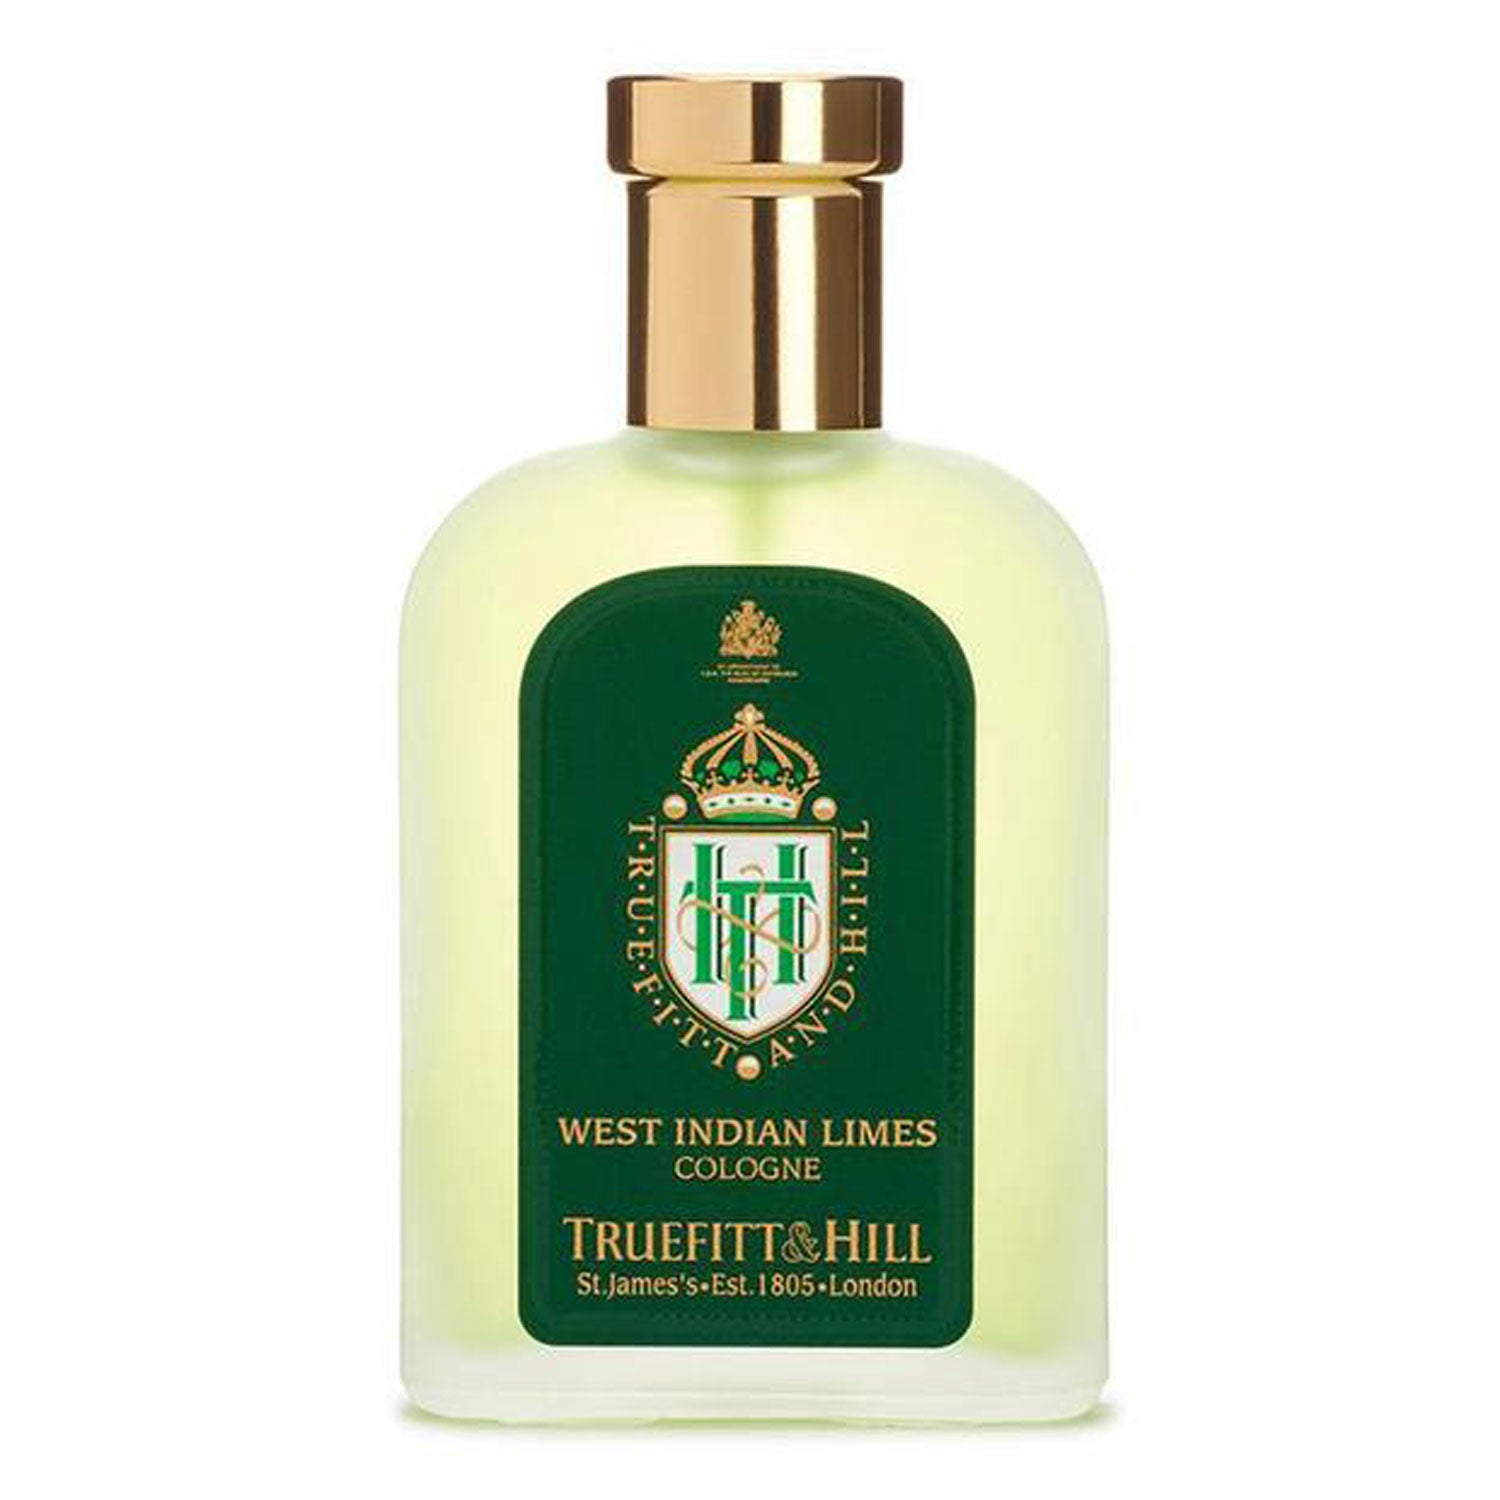 Truefitt & Hill West Indian Limes Cologne 100ml - Orcadia